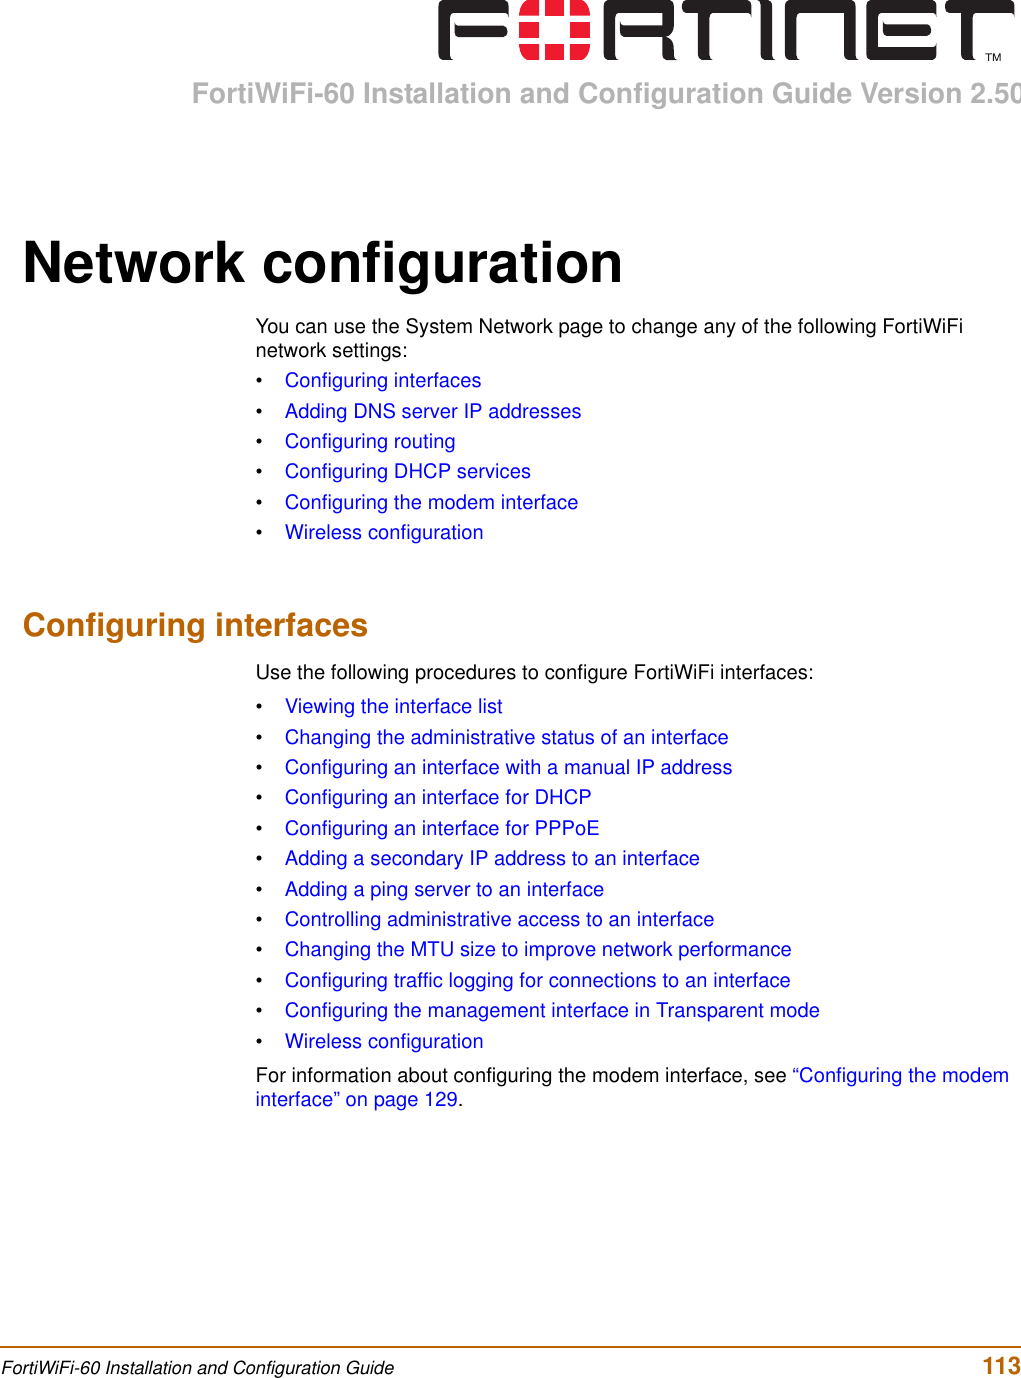 FortiWiFi-60 Installation and Configuration Guide Version 2.50FortiWiFi-60 Installation and Configuration Guide  113Network configurationYou can use the System Network page to change any of the following FortiWiFi network settings:•Configuring interfaces•Adding DNS server IP addresses•Configuring routing•Configuring DHCP services•Configuring the modem interface•Wireless configurationConfiguring interfacesUse the following procedures to configure FortiWiFi interfaces:•Viewing the interface list•Changing the administrative status of an interface•Configuring an interface with a manual IP address•Configuring an interface for DHCP•Configuring an interface for PPPoE•Adding a secondary IP address to an interface•Adding a ping server to an interface•Controlling administrative access to an interface•Changing the MTU size to improve network performance•Configuring traffic logging for connections to an interface•Configuring the management interface in Transparent mode•Wireless configurationFor information about configuring the modem interface, see “Configuring the modem interface” on page 129.